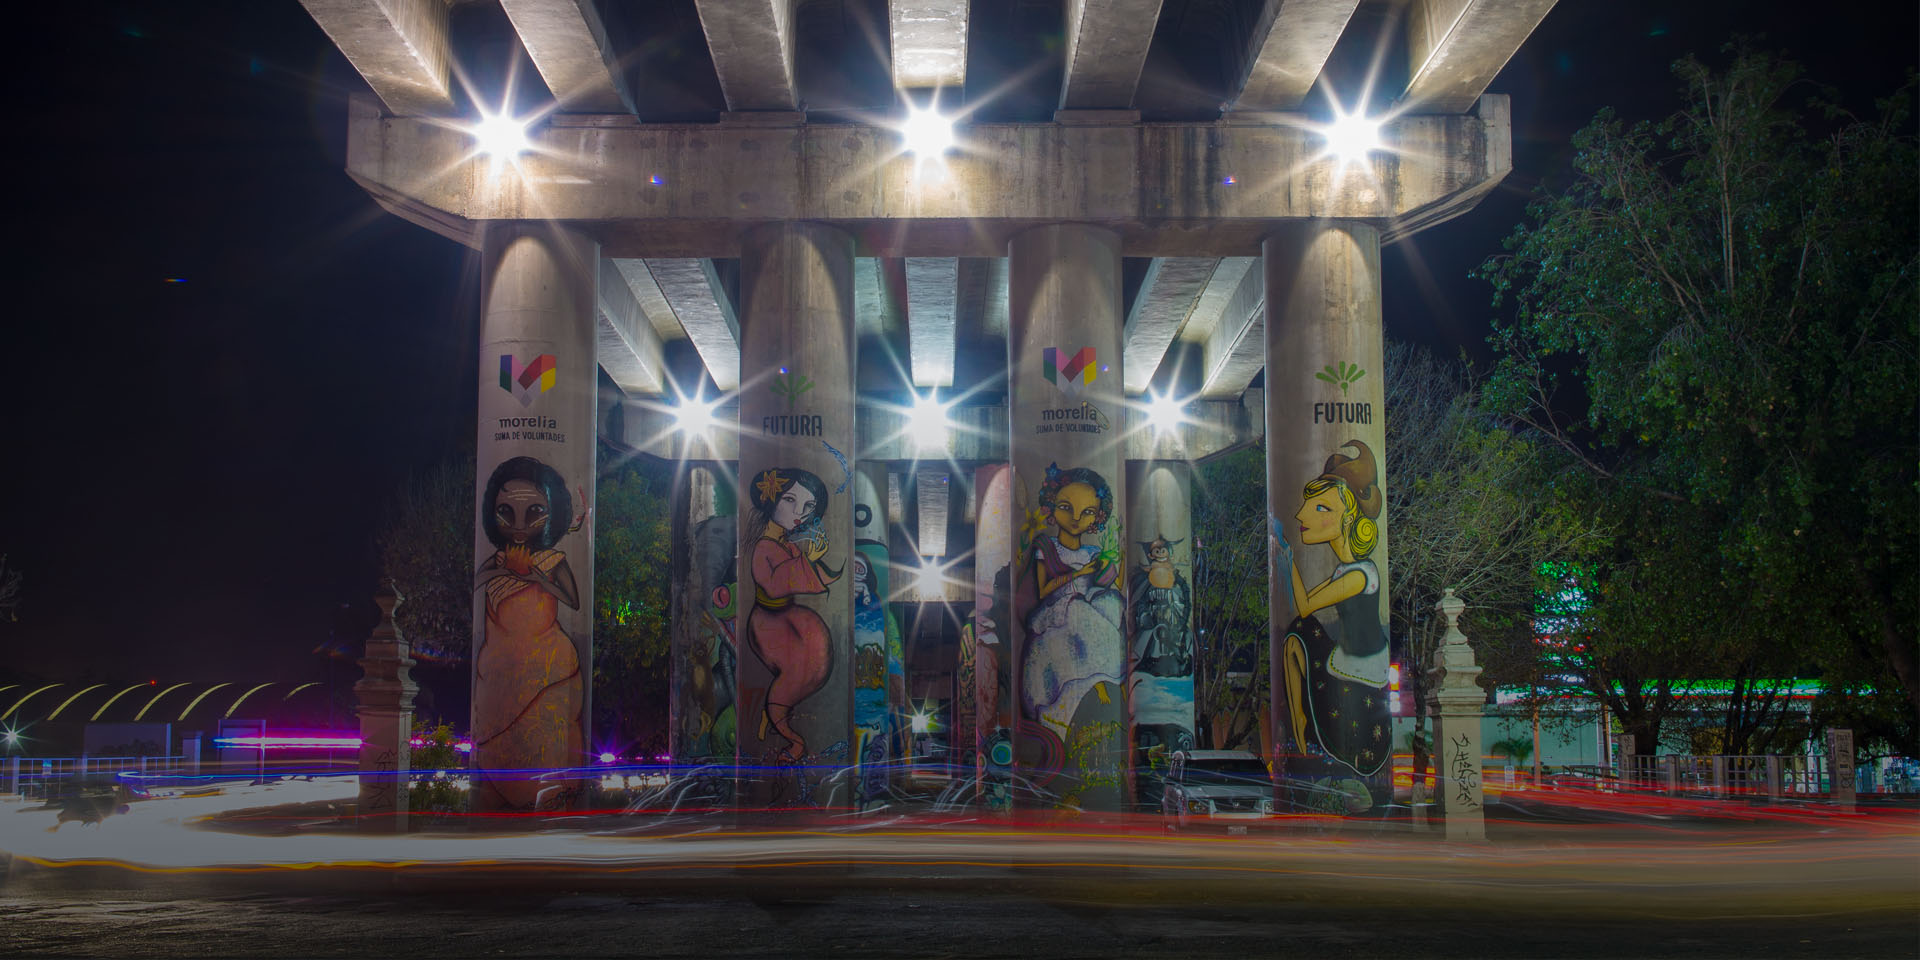 Image of four bridge columns each with a mural showing women from different cultural backgrounds.